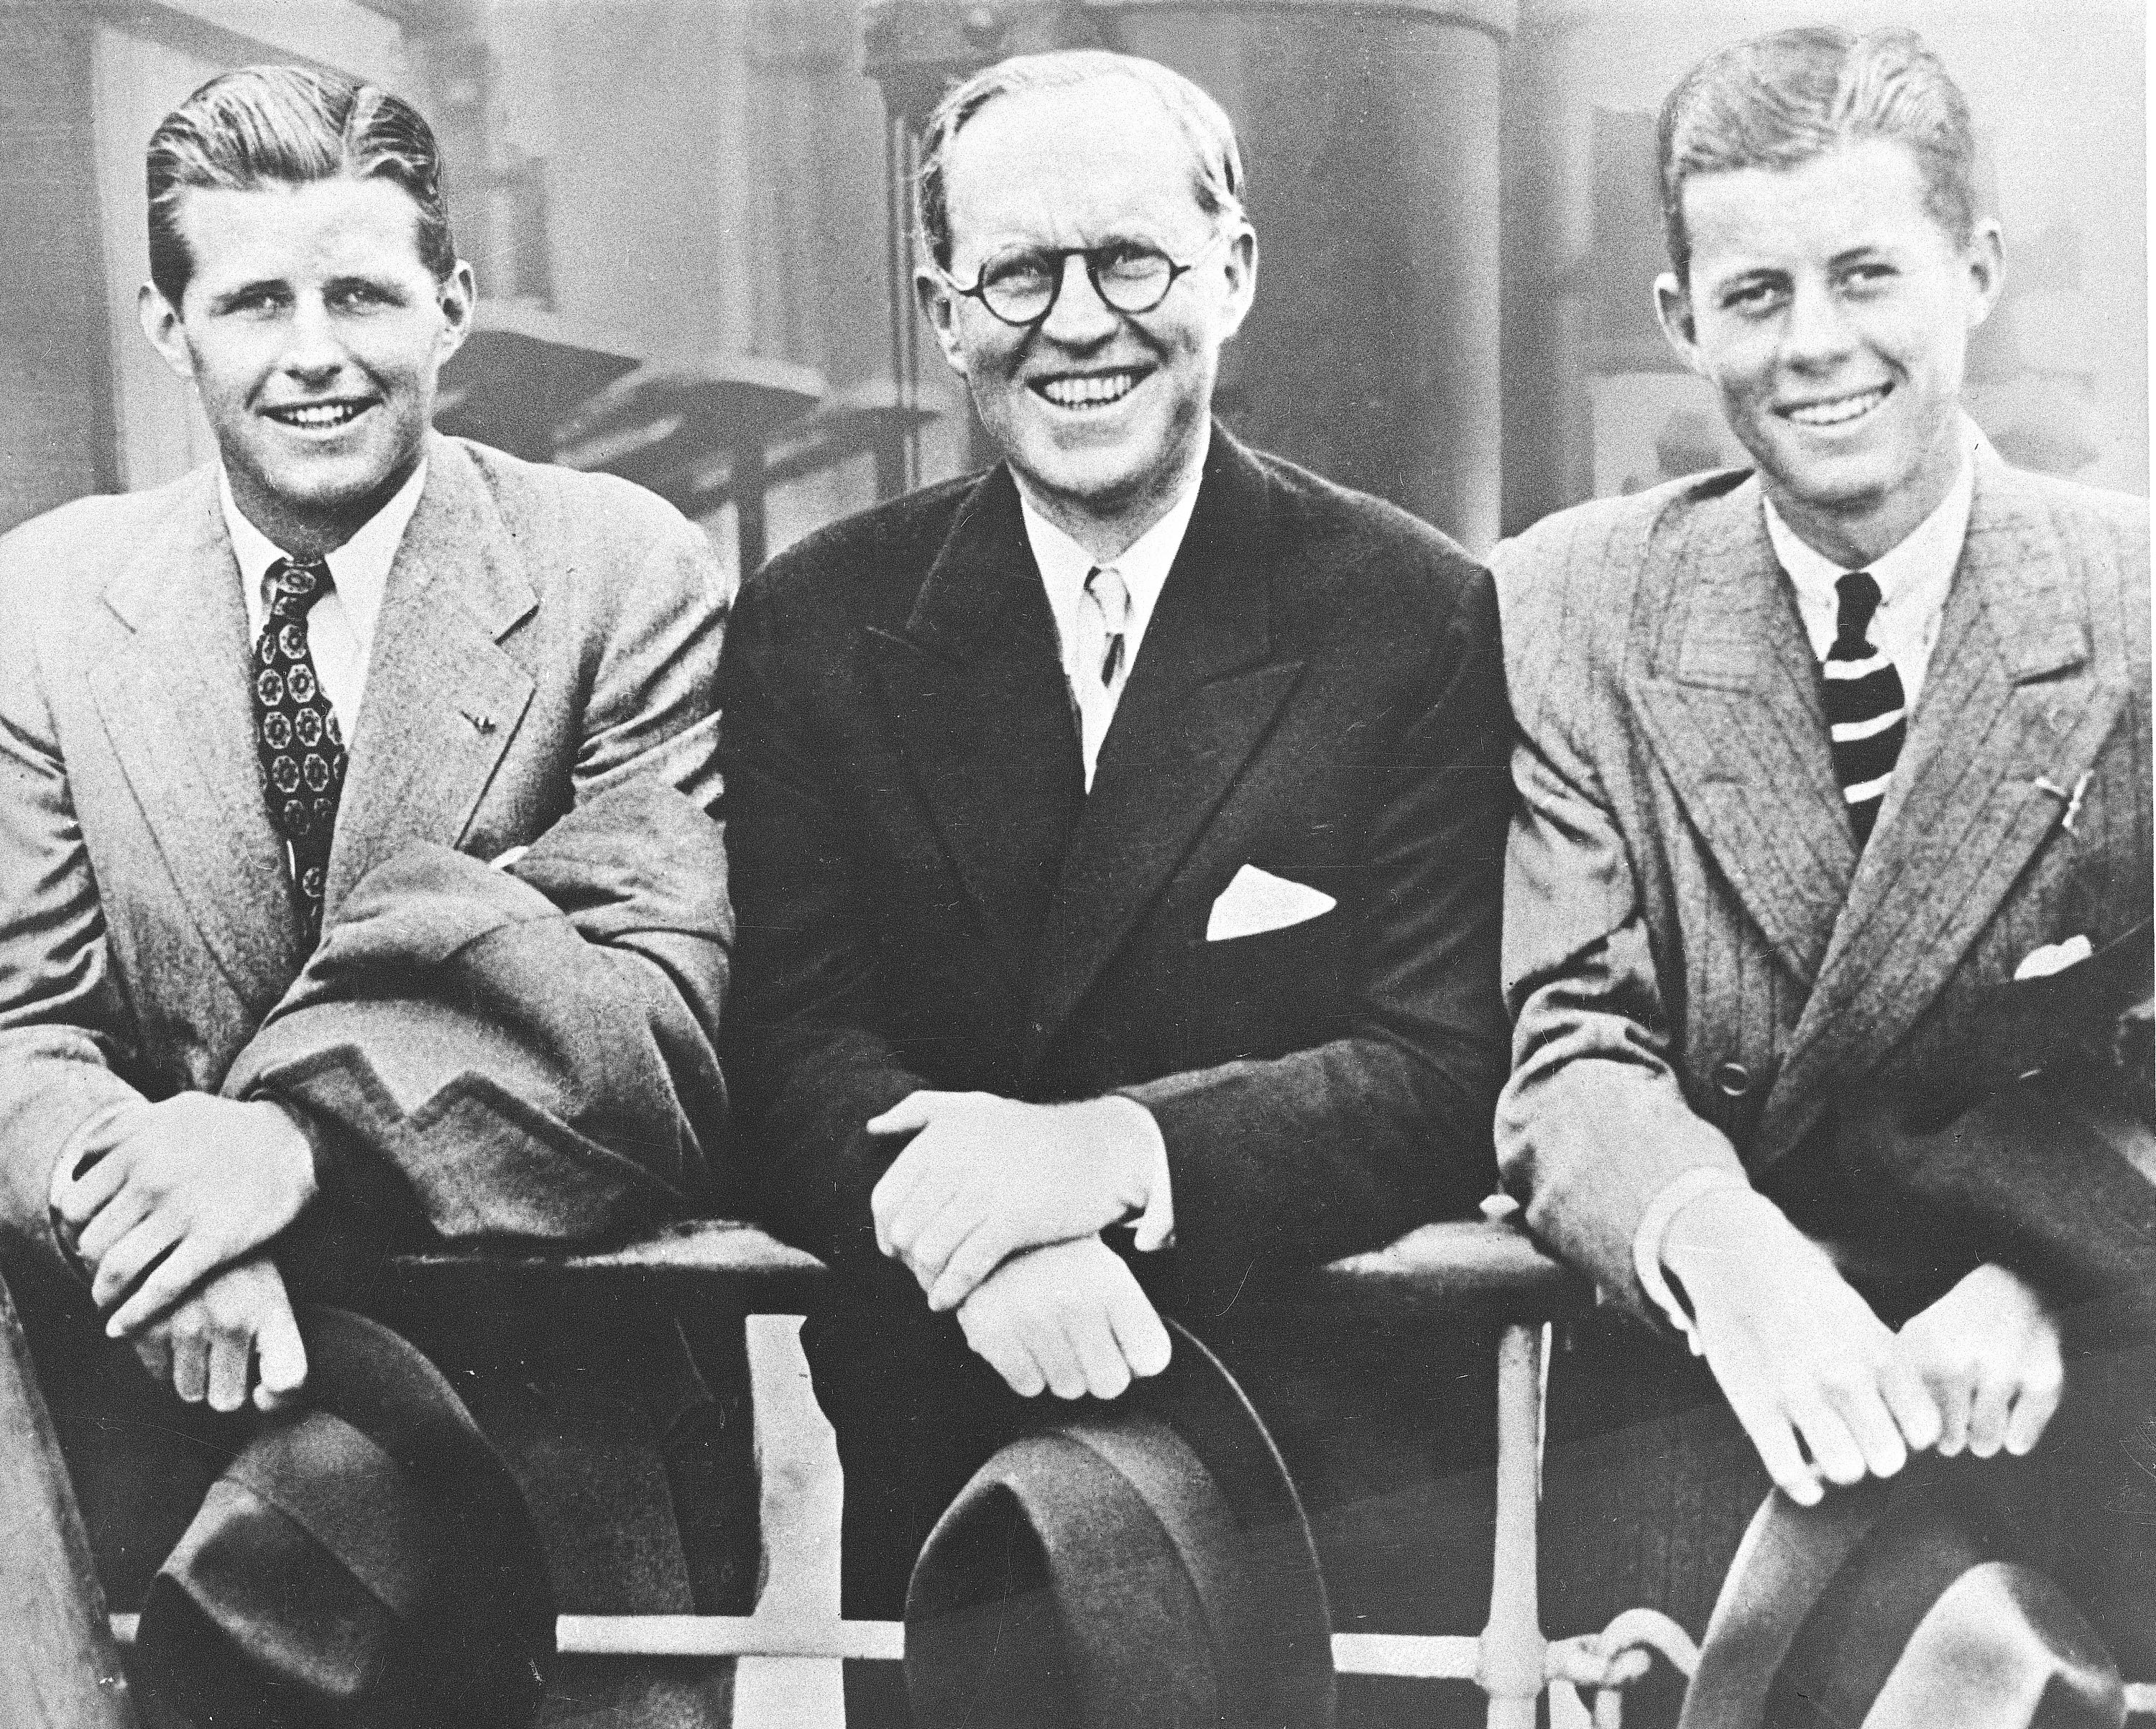 U.S. Ambassador to Great Britain Joseph P. Kennedy, center, is flanked by his sons, Joseph P. Kennedy Jr., left, and John F. Kennedy, right, as he poses aboard an ocean liner in this 1938 photograph. (AP Photo)